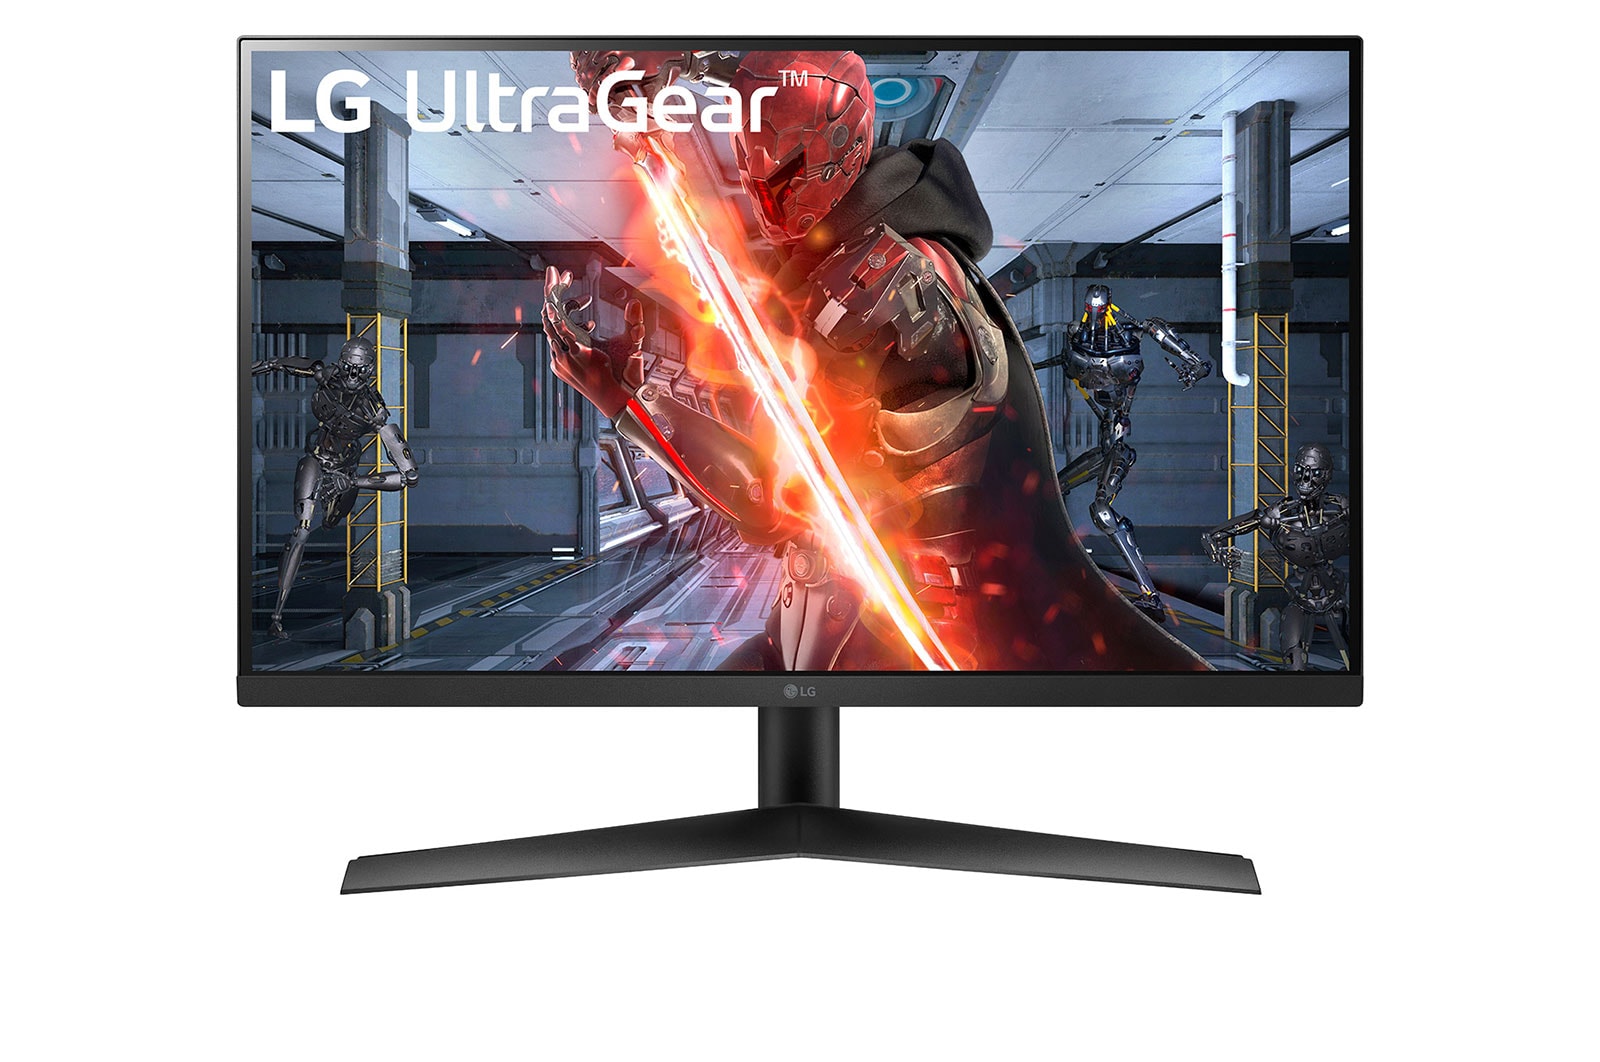 LG 27 (68.58cm) UltraGear™ Full HD IPS 1ms (GtG) Gaming Monitor with NVIDIA® G-SYNC® Compatible, 27GN60R-B